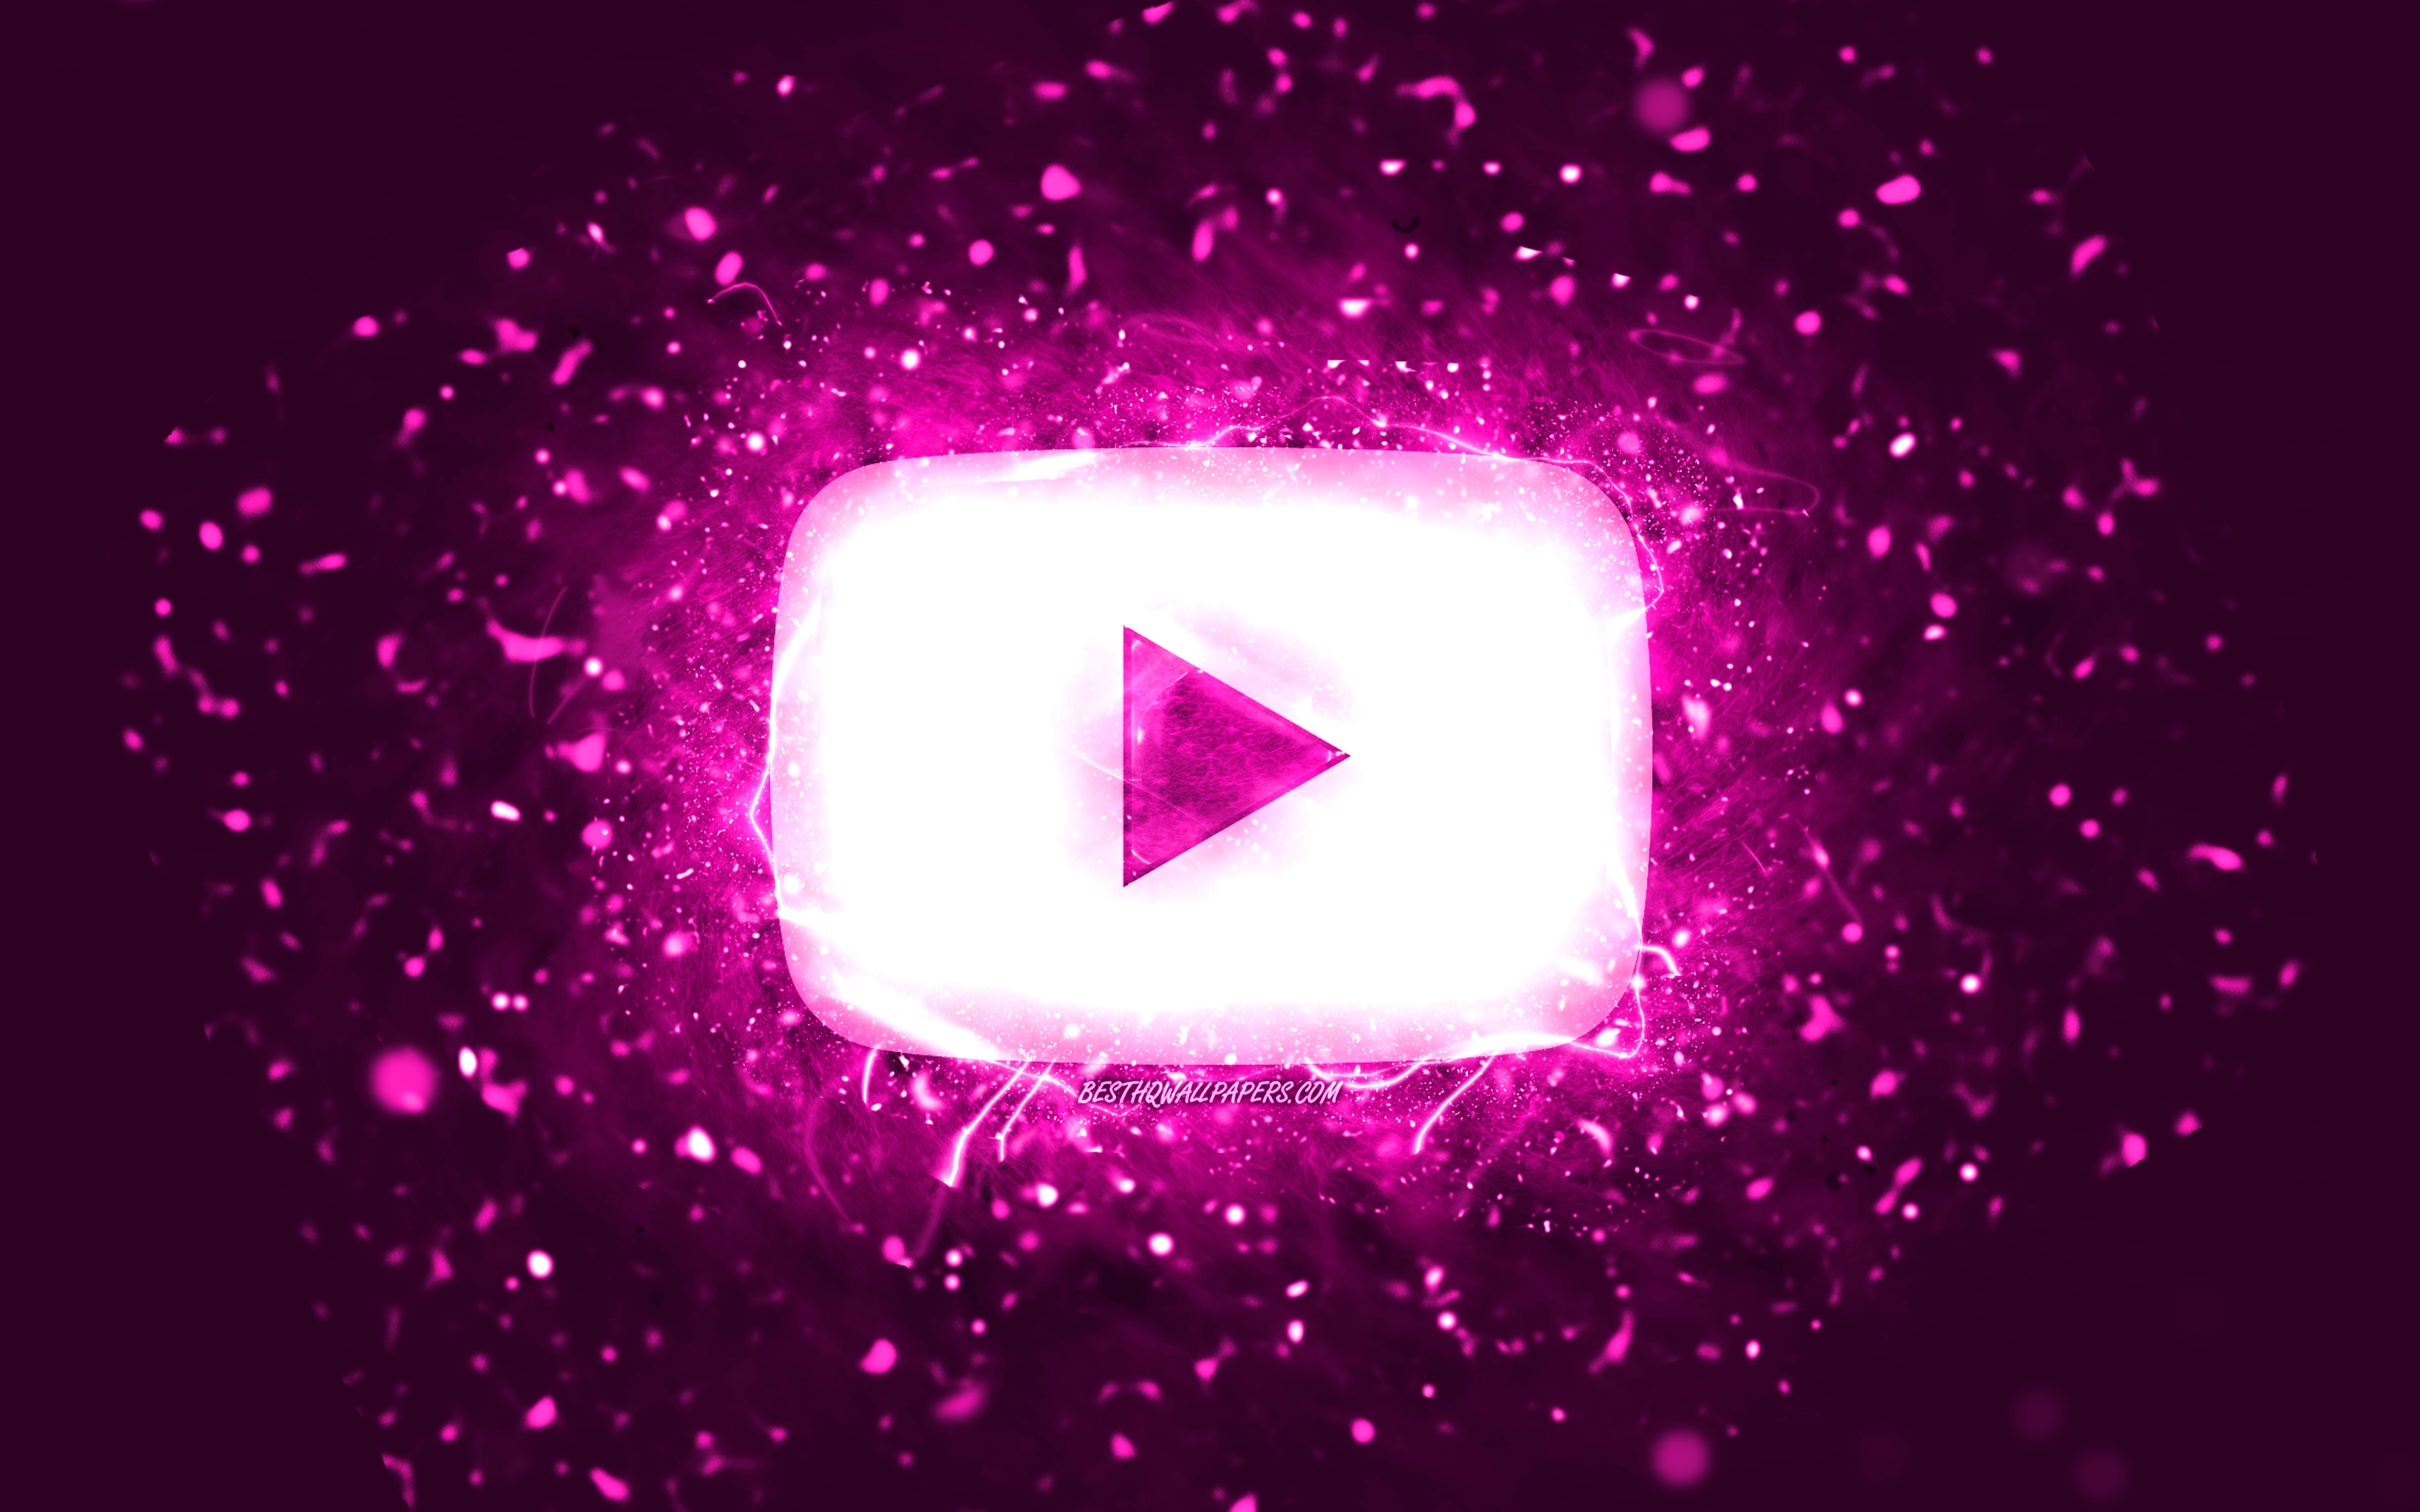 Download wallpaper Youtube purple logo, 4k, purple neon lights, social network, creative, purple abstract background, Youtube logo, Youtube for desktop with resolution 3840x2400. High Quality HD picture wallpaper